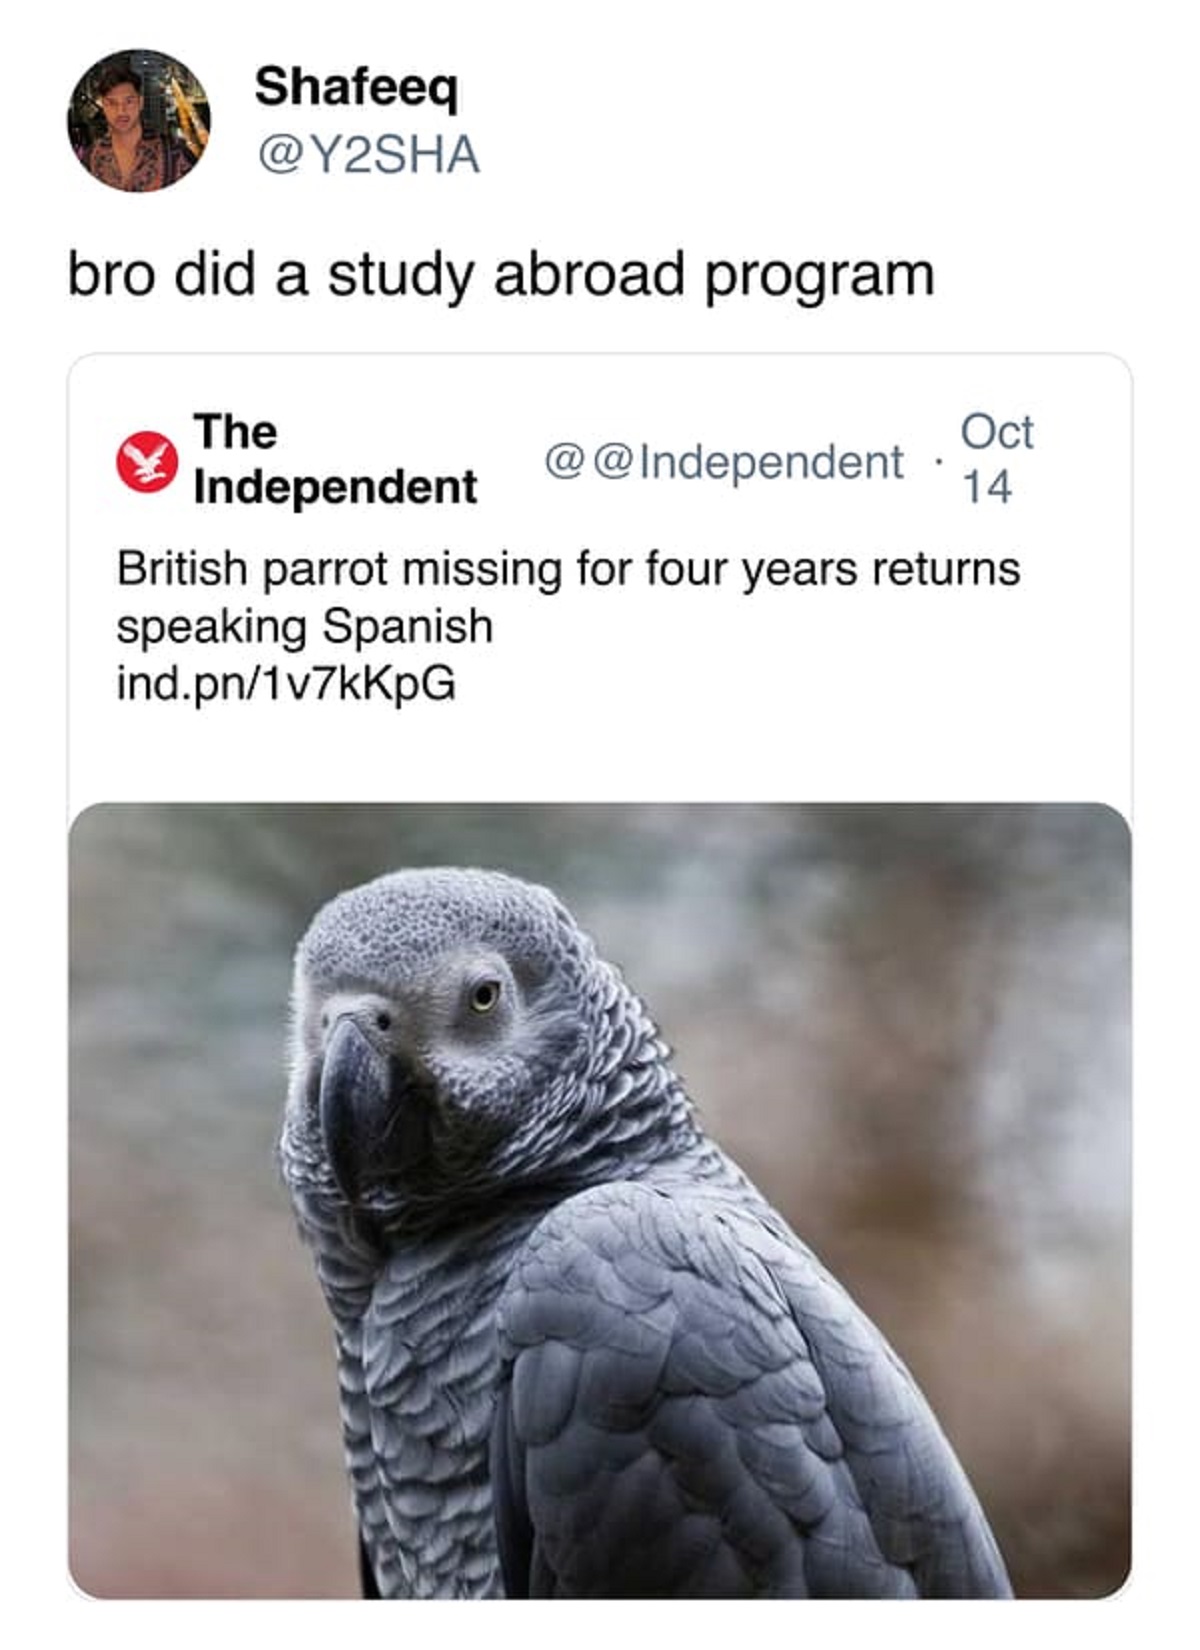 fauna - Shafeeq bro did a study abroad program The Oct 14 @ Independent British parrot missing for four years returns speaking Spanish ind.pnKpG